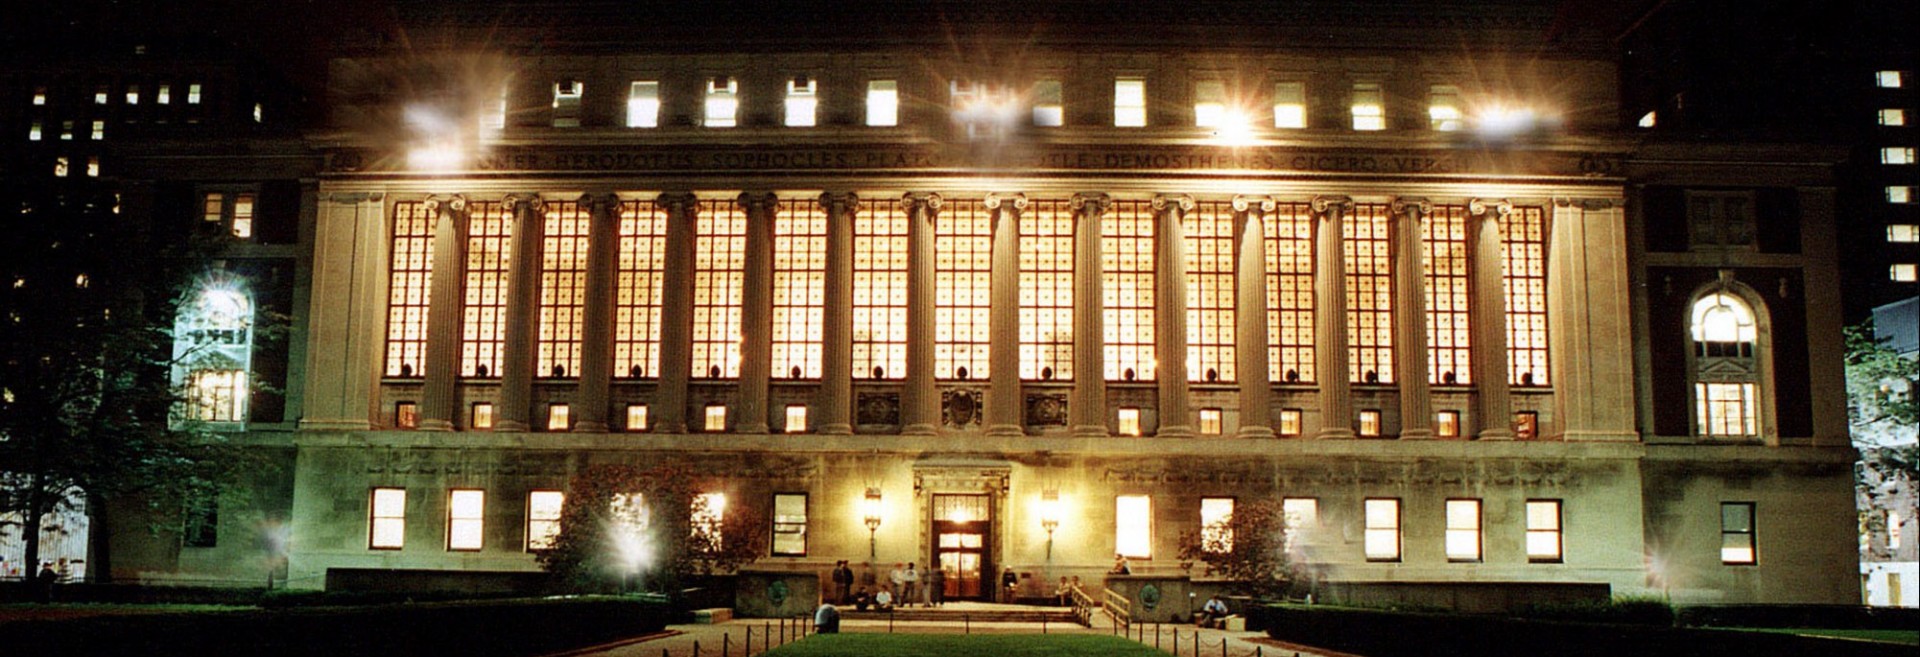 Butler Library at night